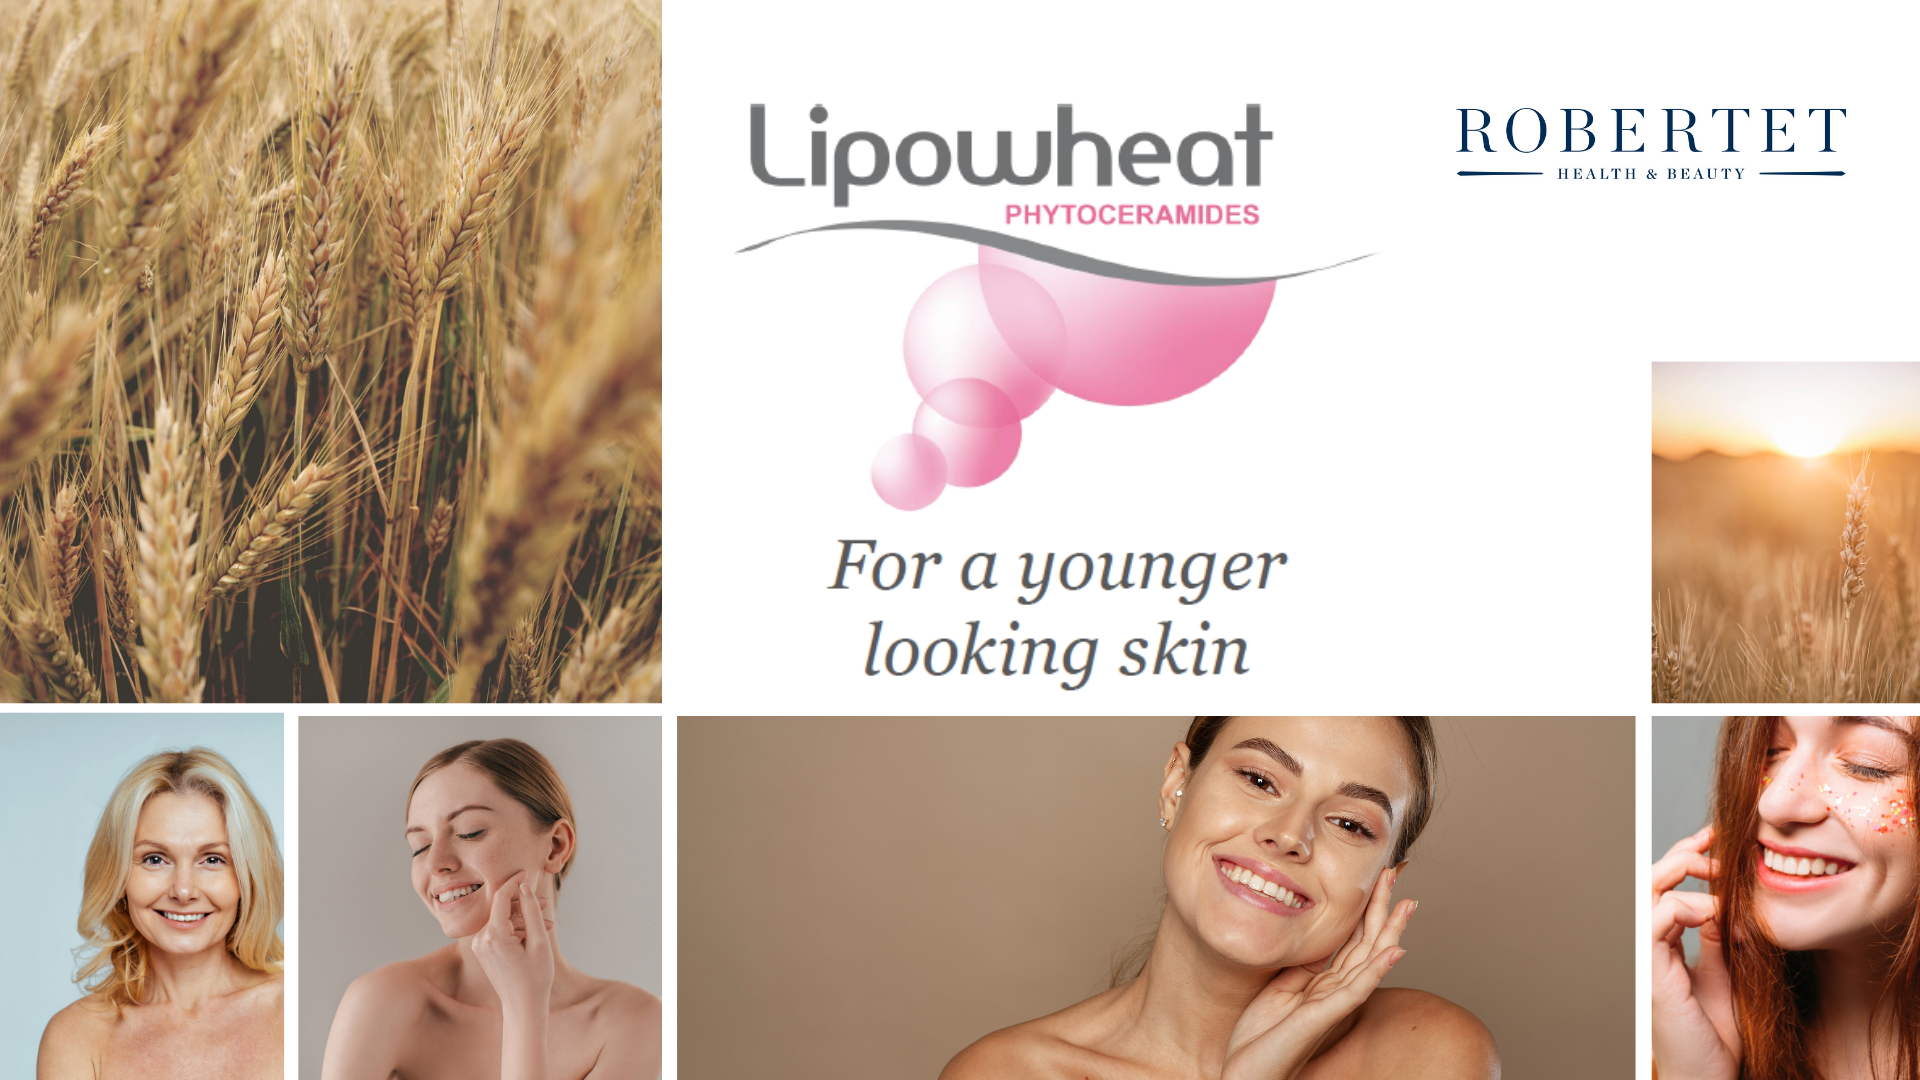 Lipowheat™ – Premium Nutricosmetic Ingredient for A Younger Looking Skin